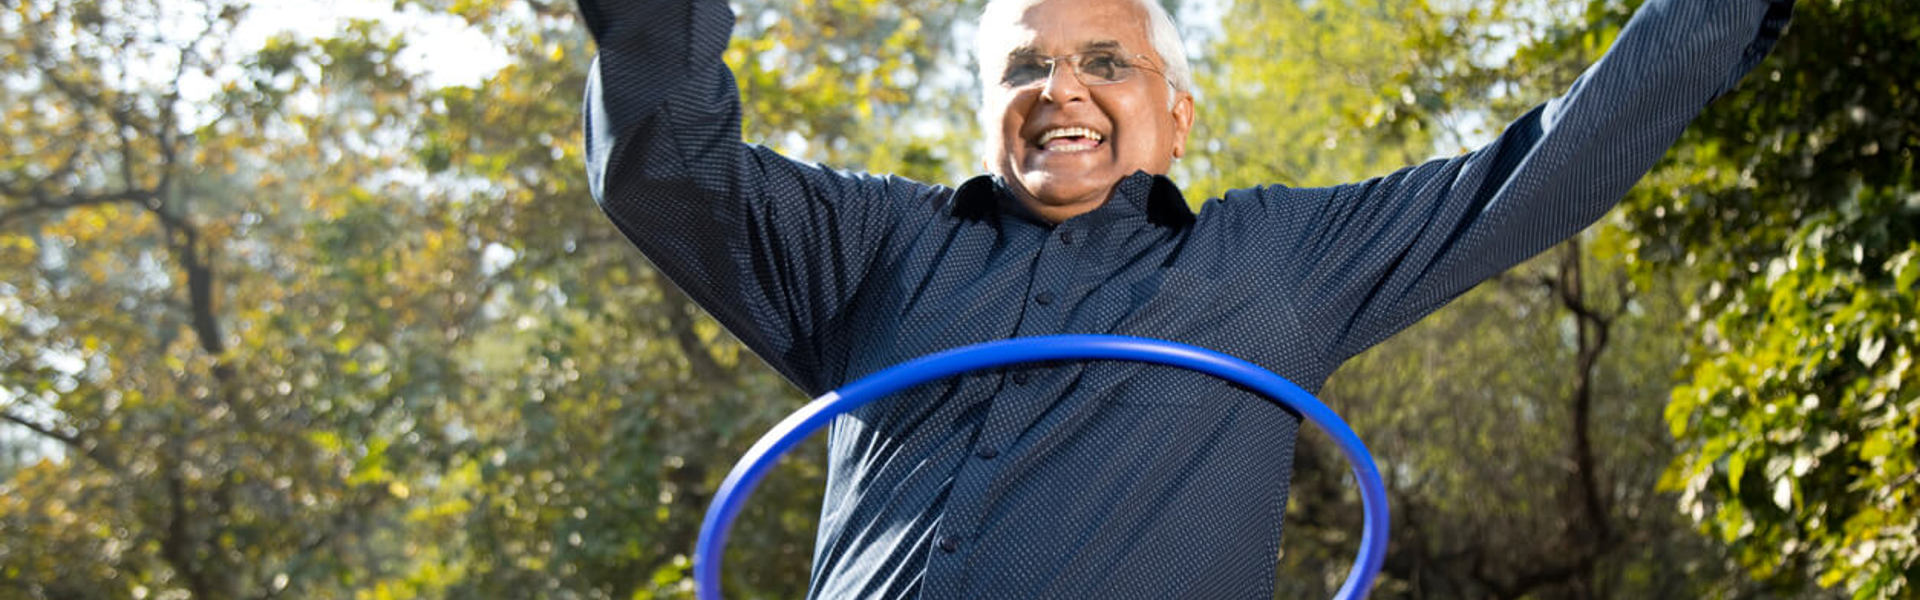 An older man with glasses hula hooping outdoors